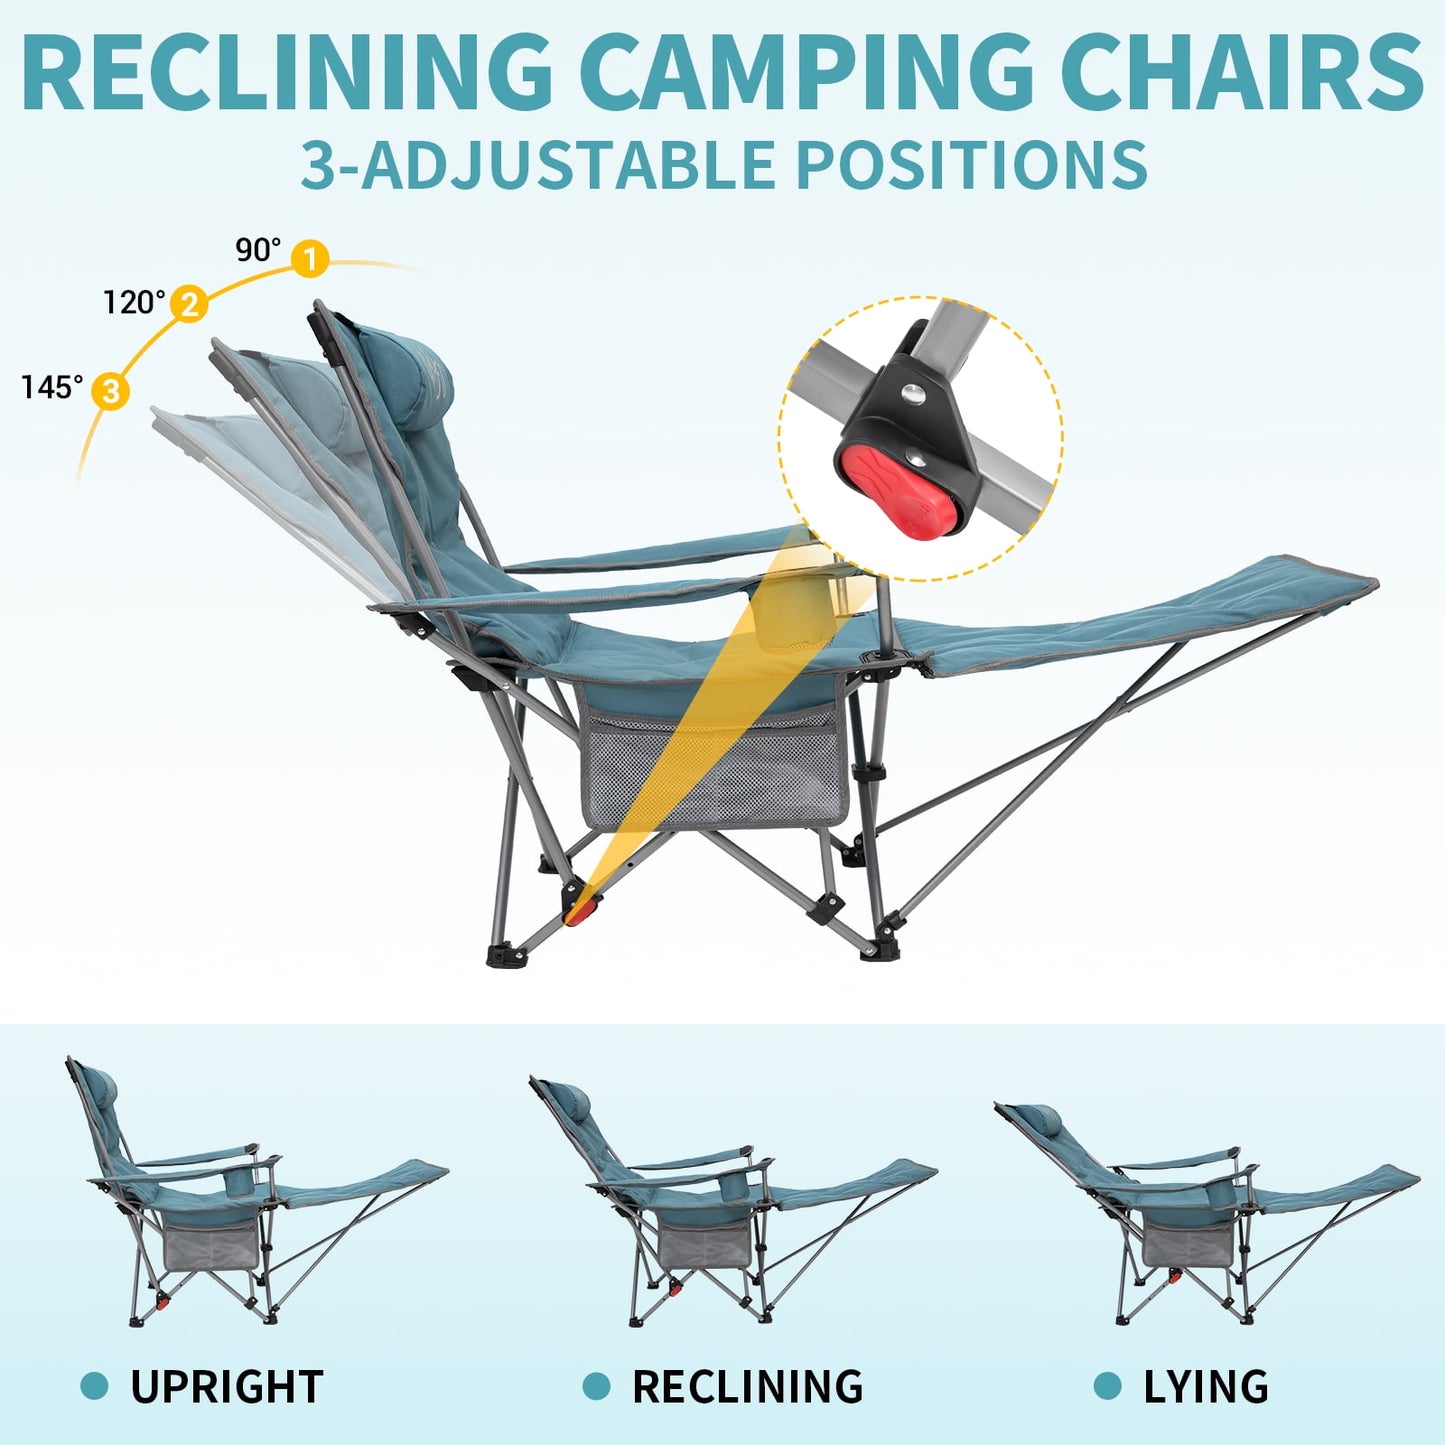 WEJOY Versatile 2-in-1 Padded 3-Position Adjustable Outdoor Folding Lounge Lawn Chair